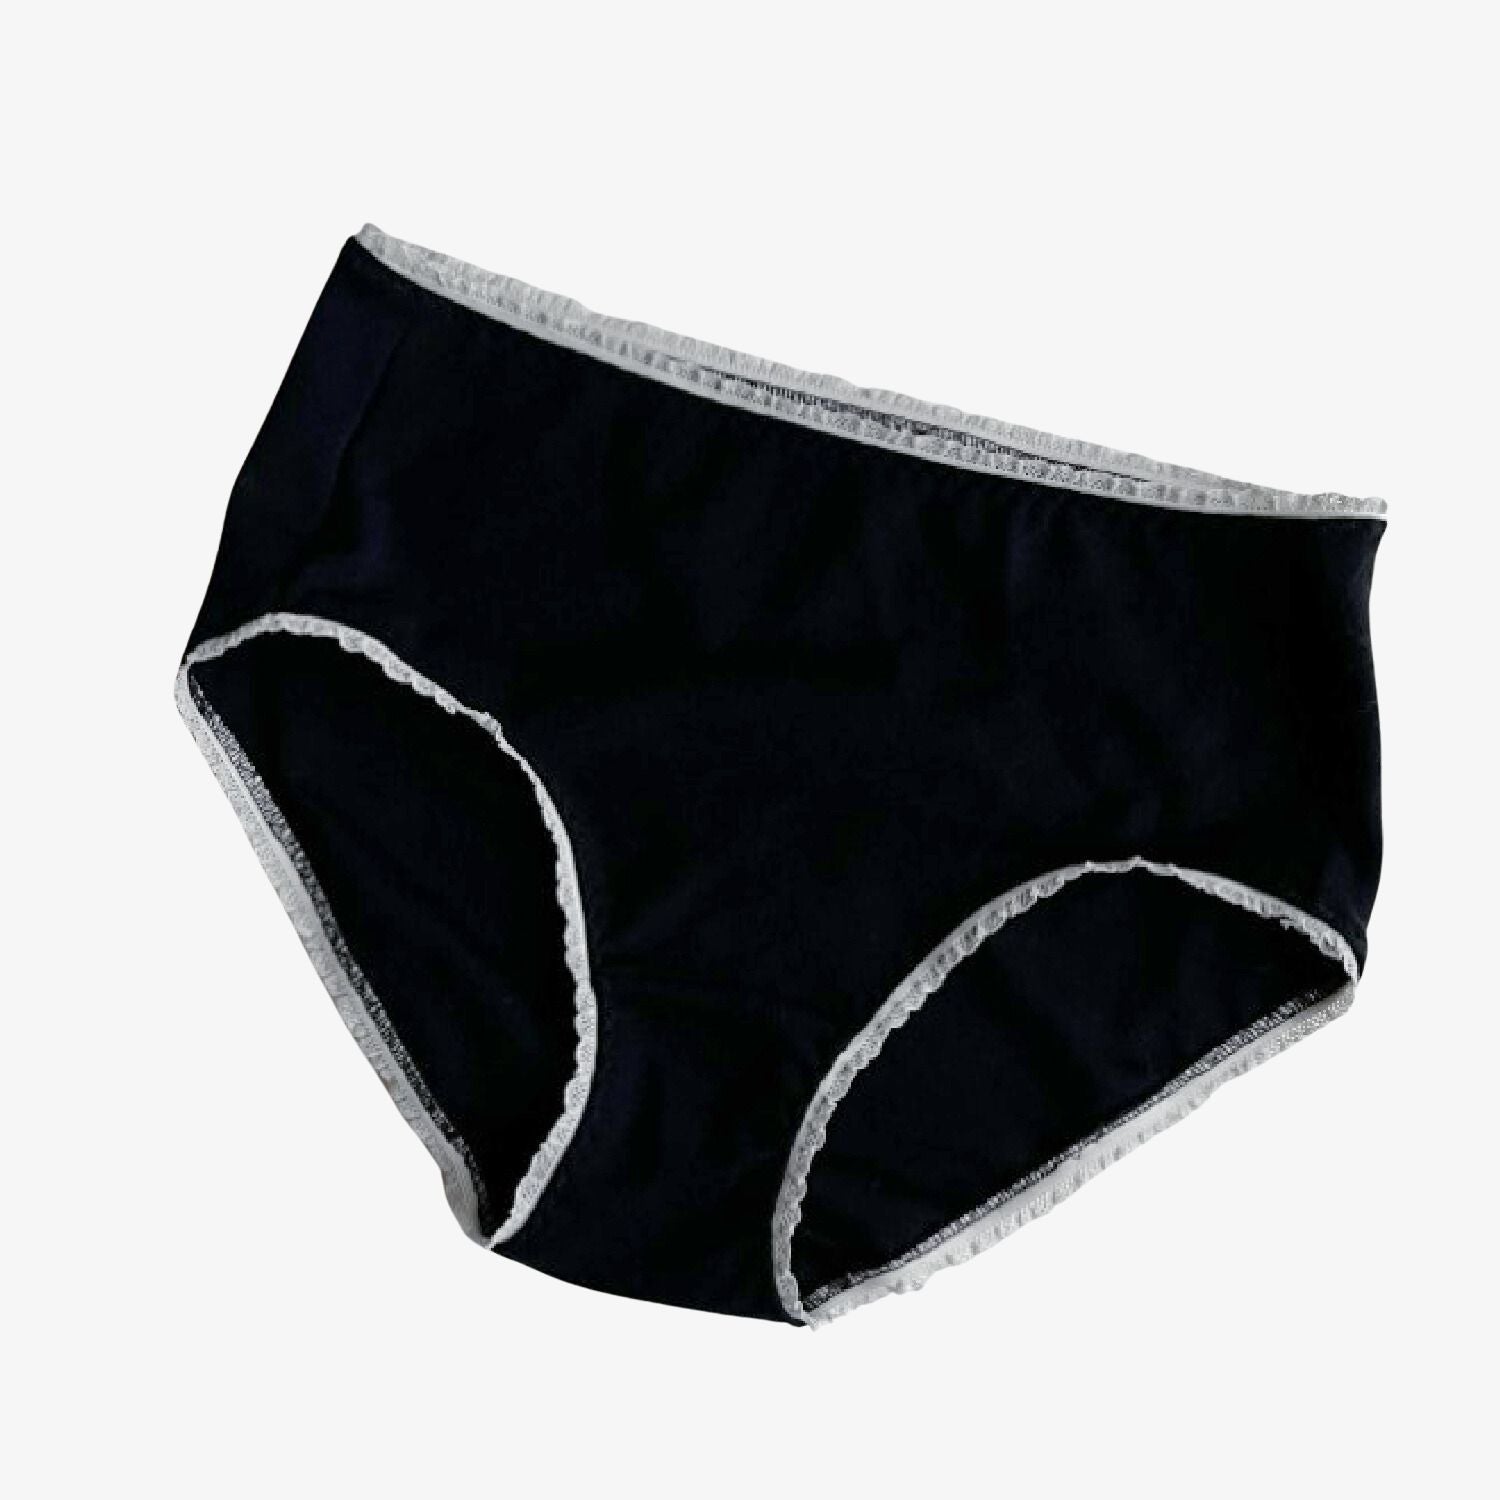 Merino wool hipster brief | Made to measure lingerie